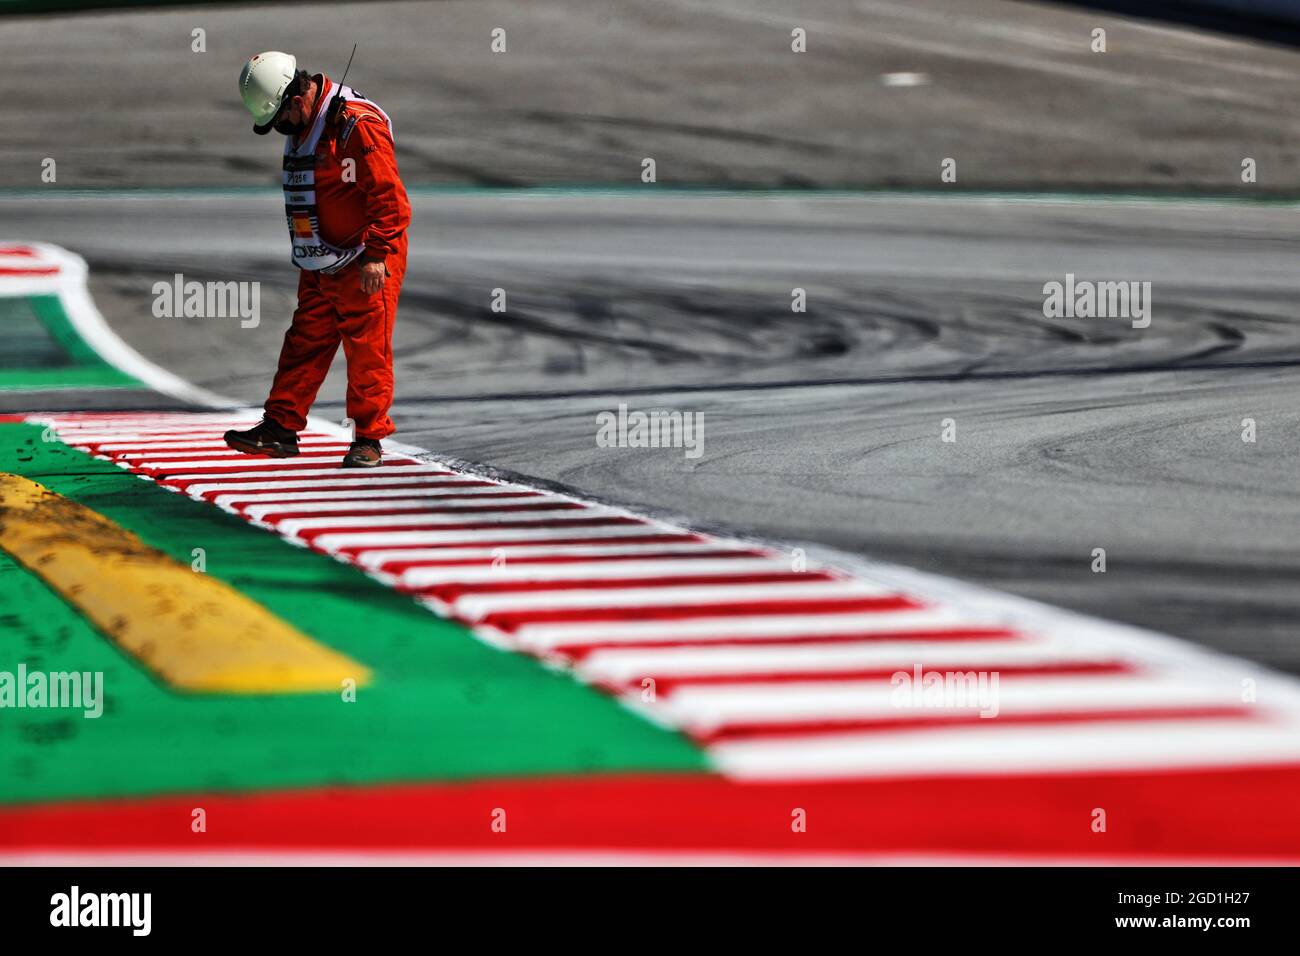 A marshal inspects the kerb. Spanish Grand Prix, Saturday 8th May 2021. Barcelona, Spain. Stock Photo